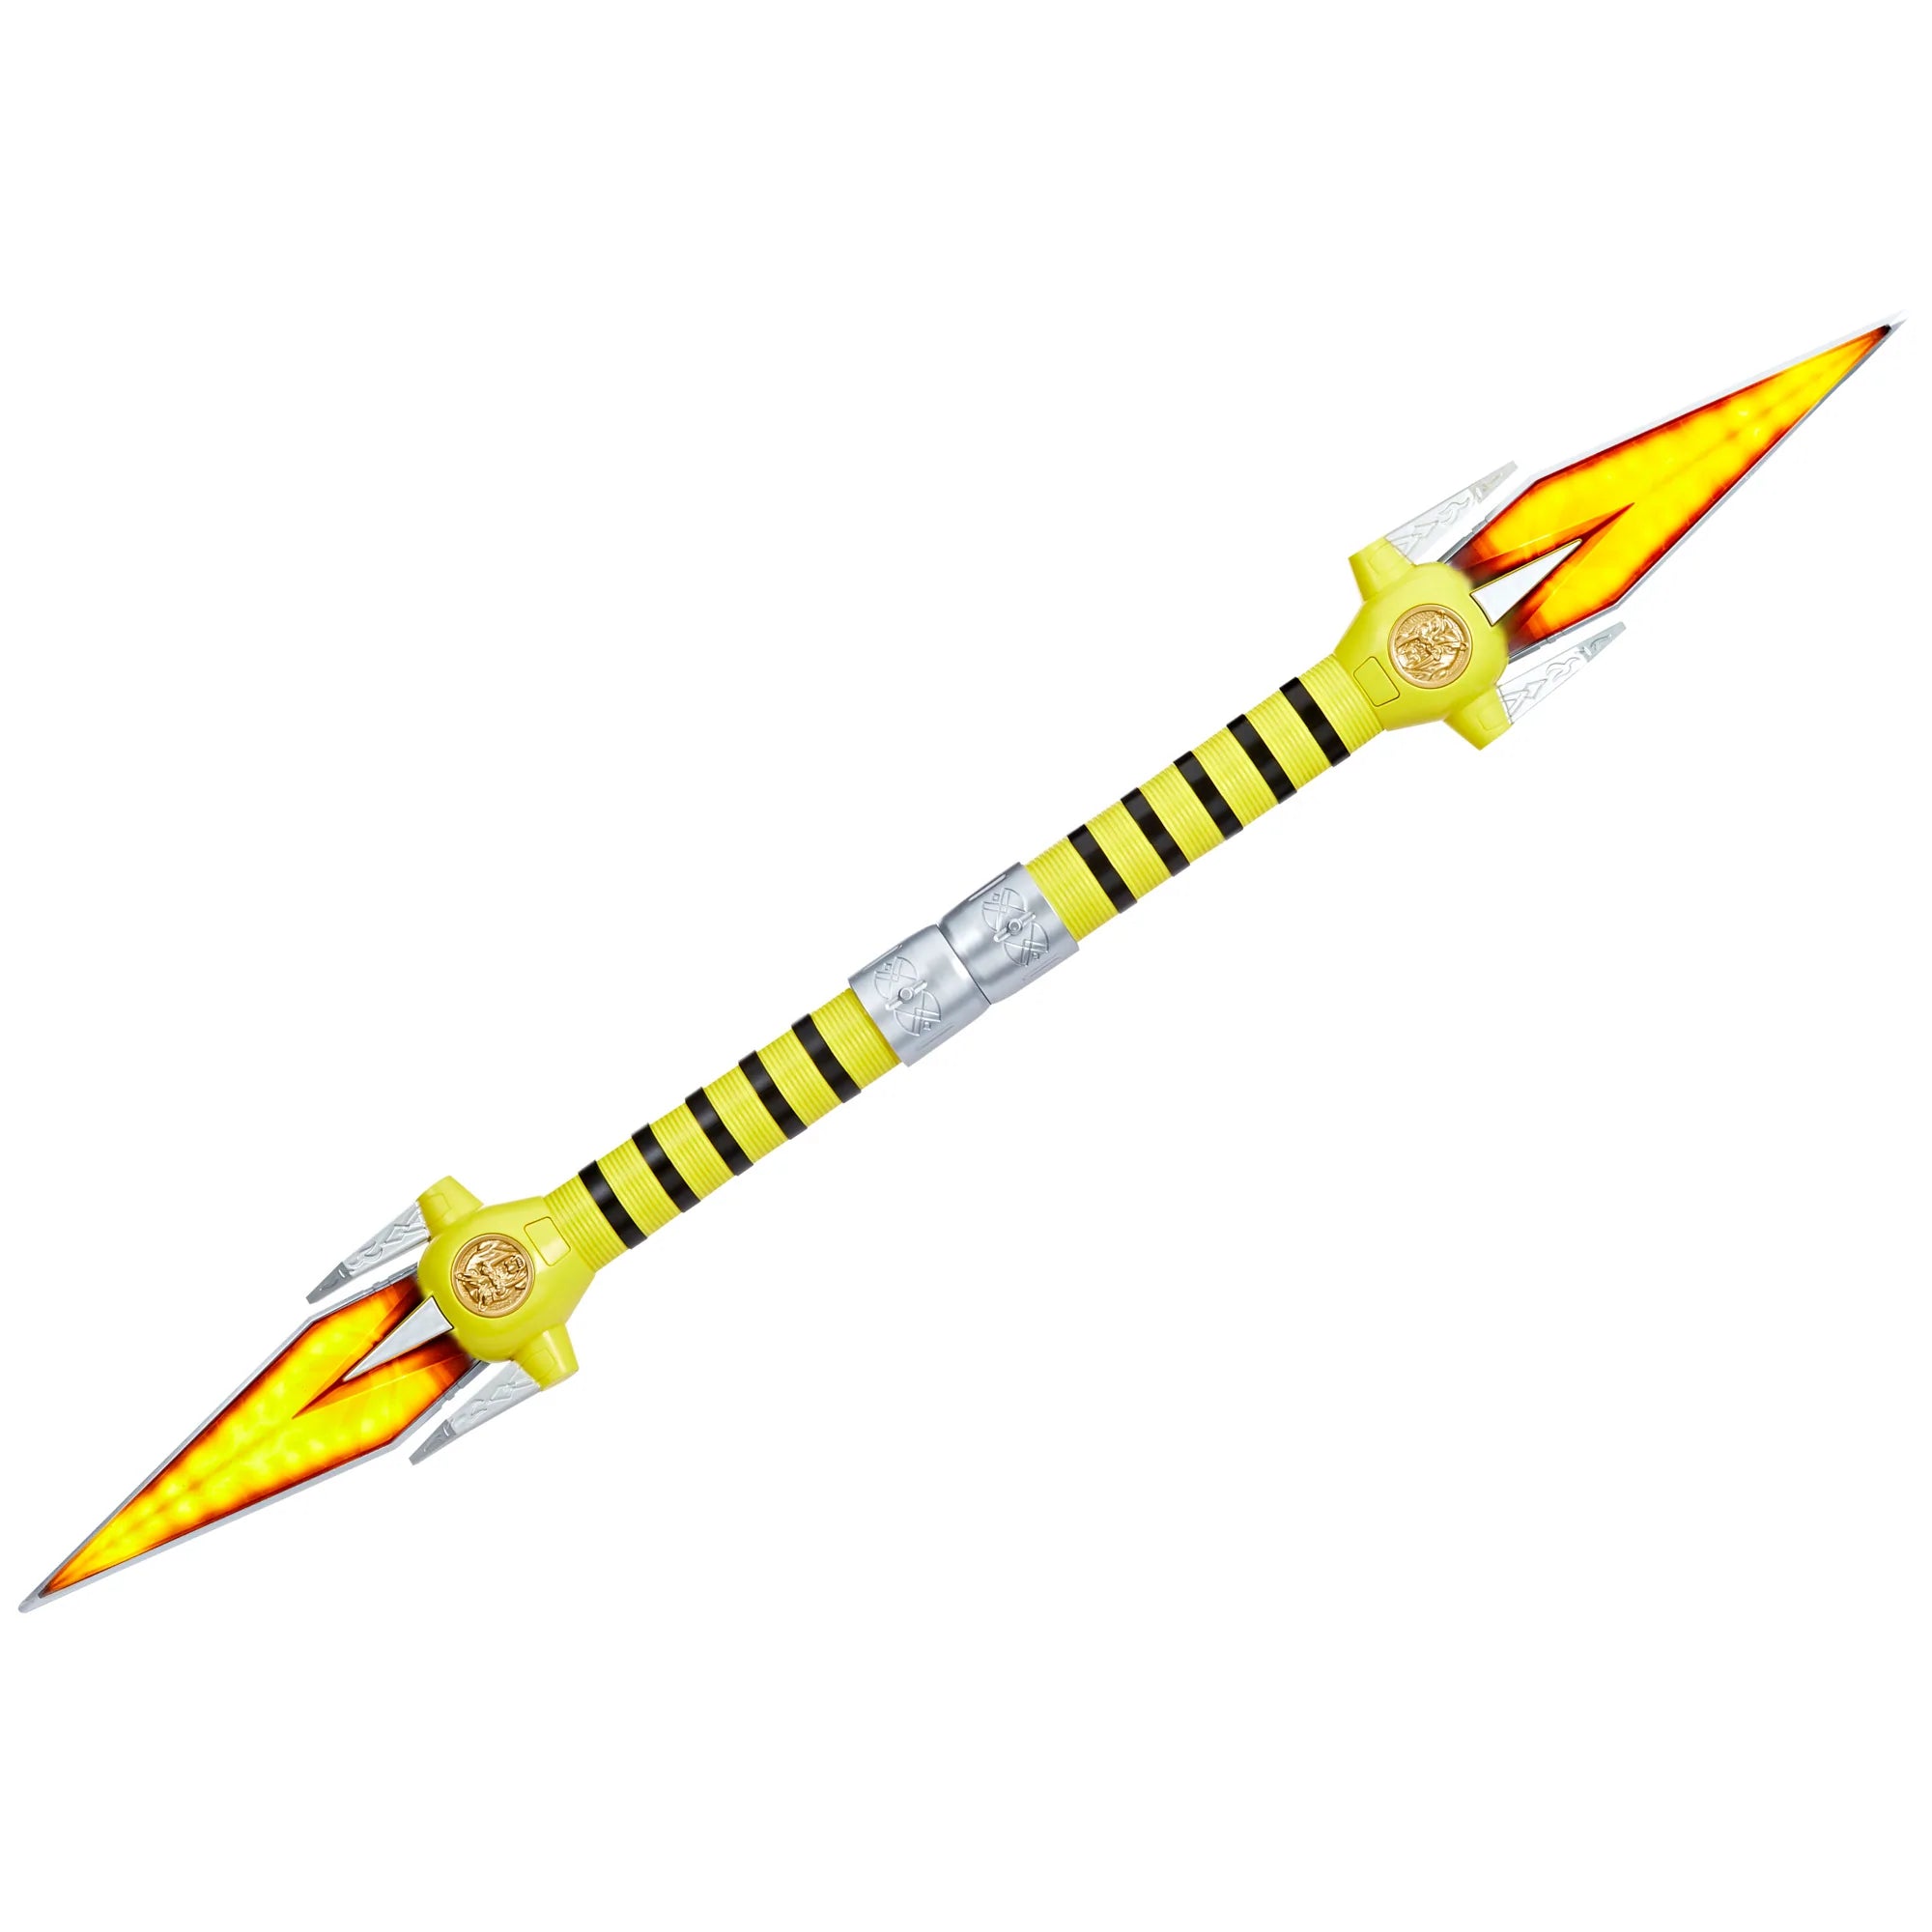 Hasbro - Power Rangers Lightning Collection - Roleplay - Mighty Morphin Yellow Ranger Power Daggers